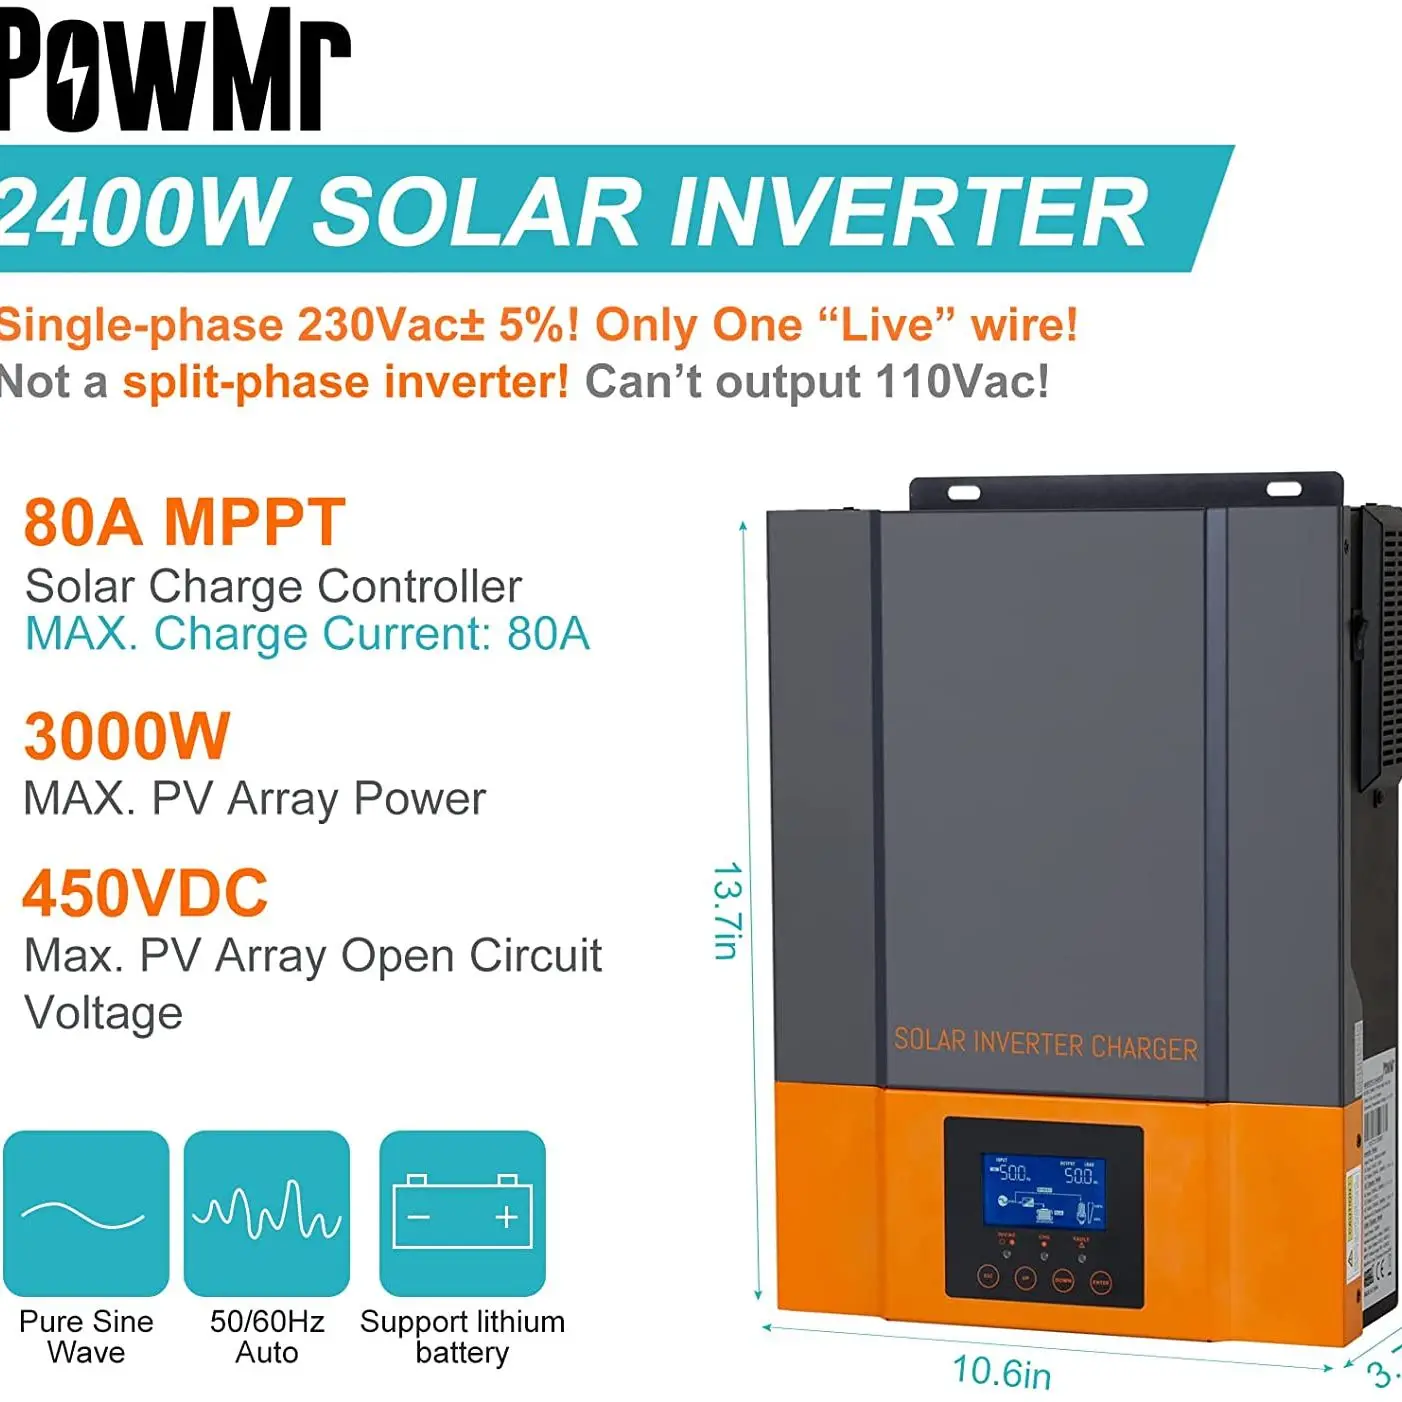 

POWMR Wide Voltage MPPT 80A 2400W Solar Charger Controller High Frequency Hybrid Inverter 230V Output Max PV 450V Battery Charge